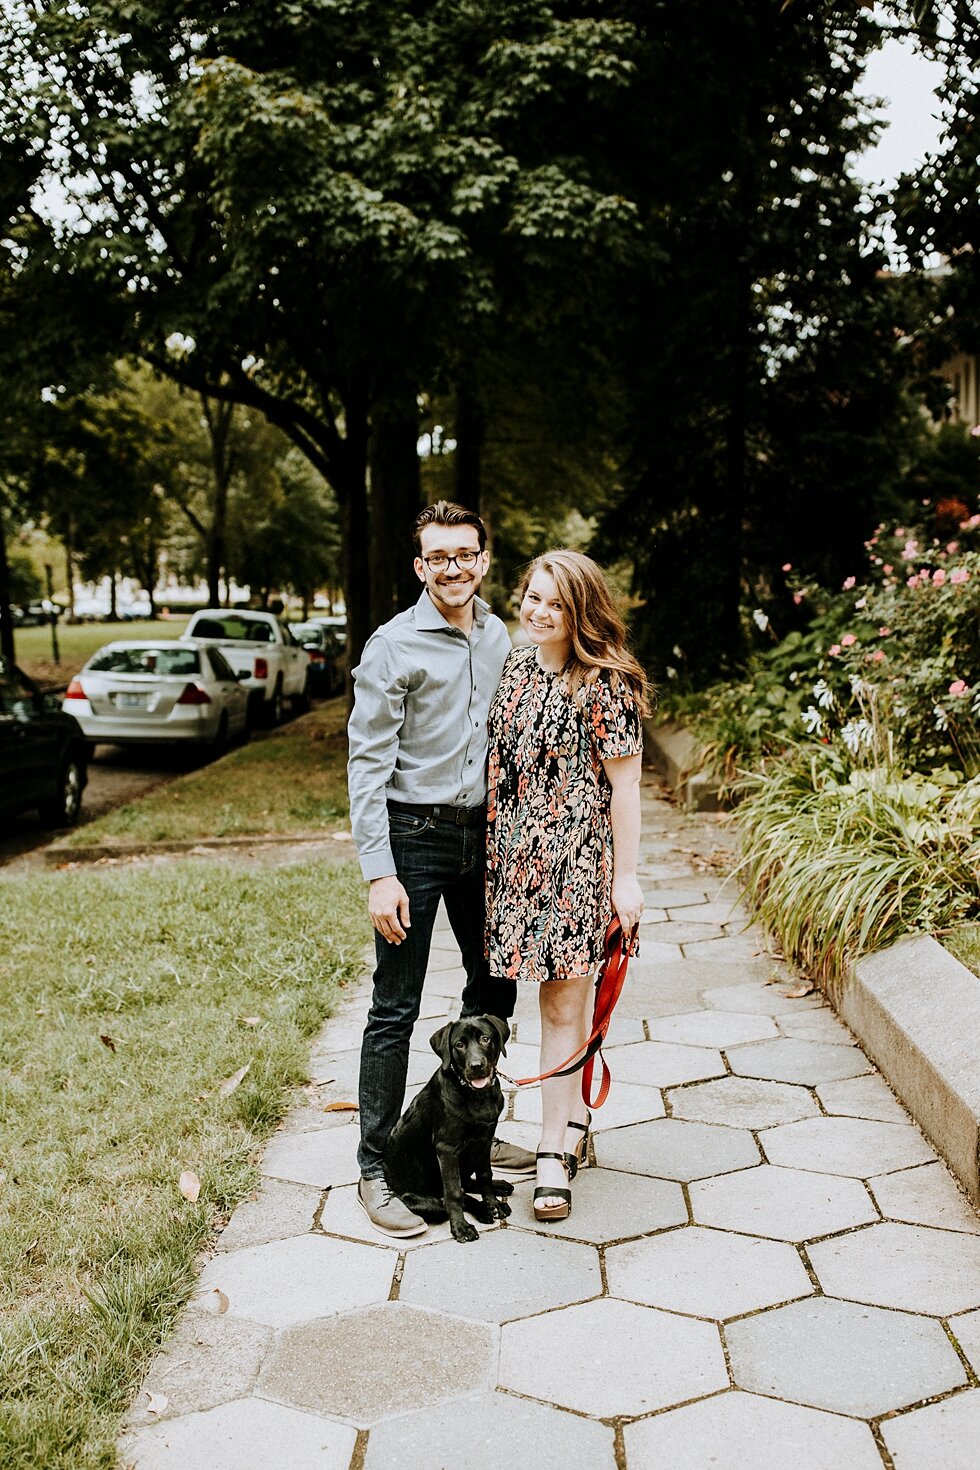  Couple standing together for their engagement session with their black dog. getting married outdoor session engaged couple together wedding preparation love excited stunning relationship #engagementphotos #midwestphotographer #kywedding #louisville 